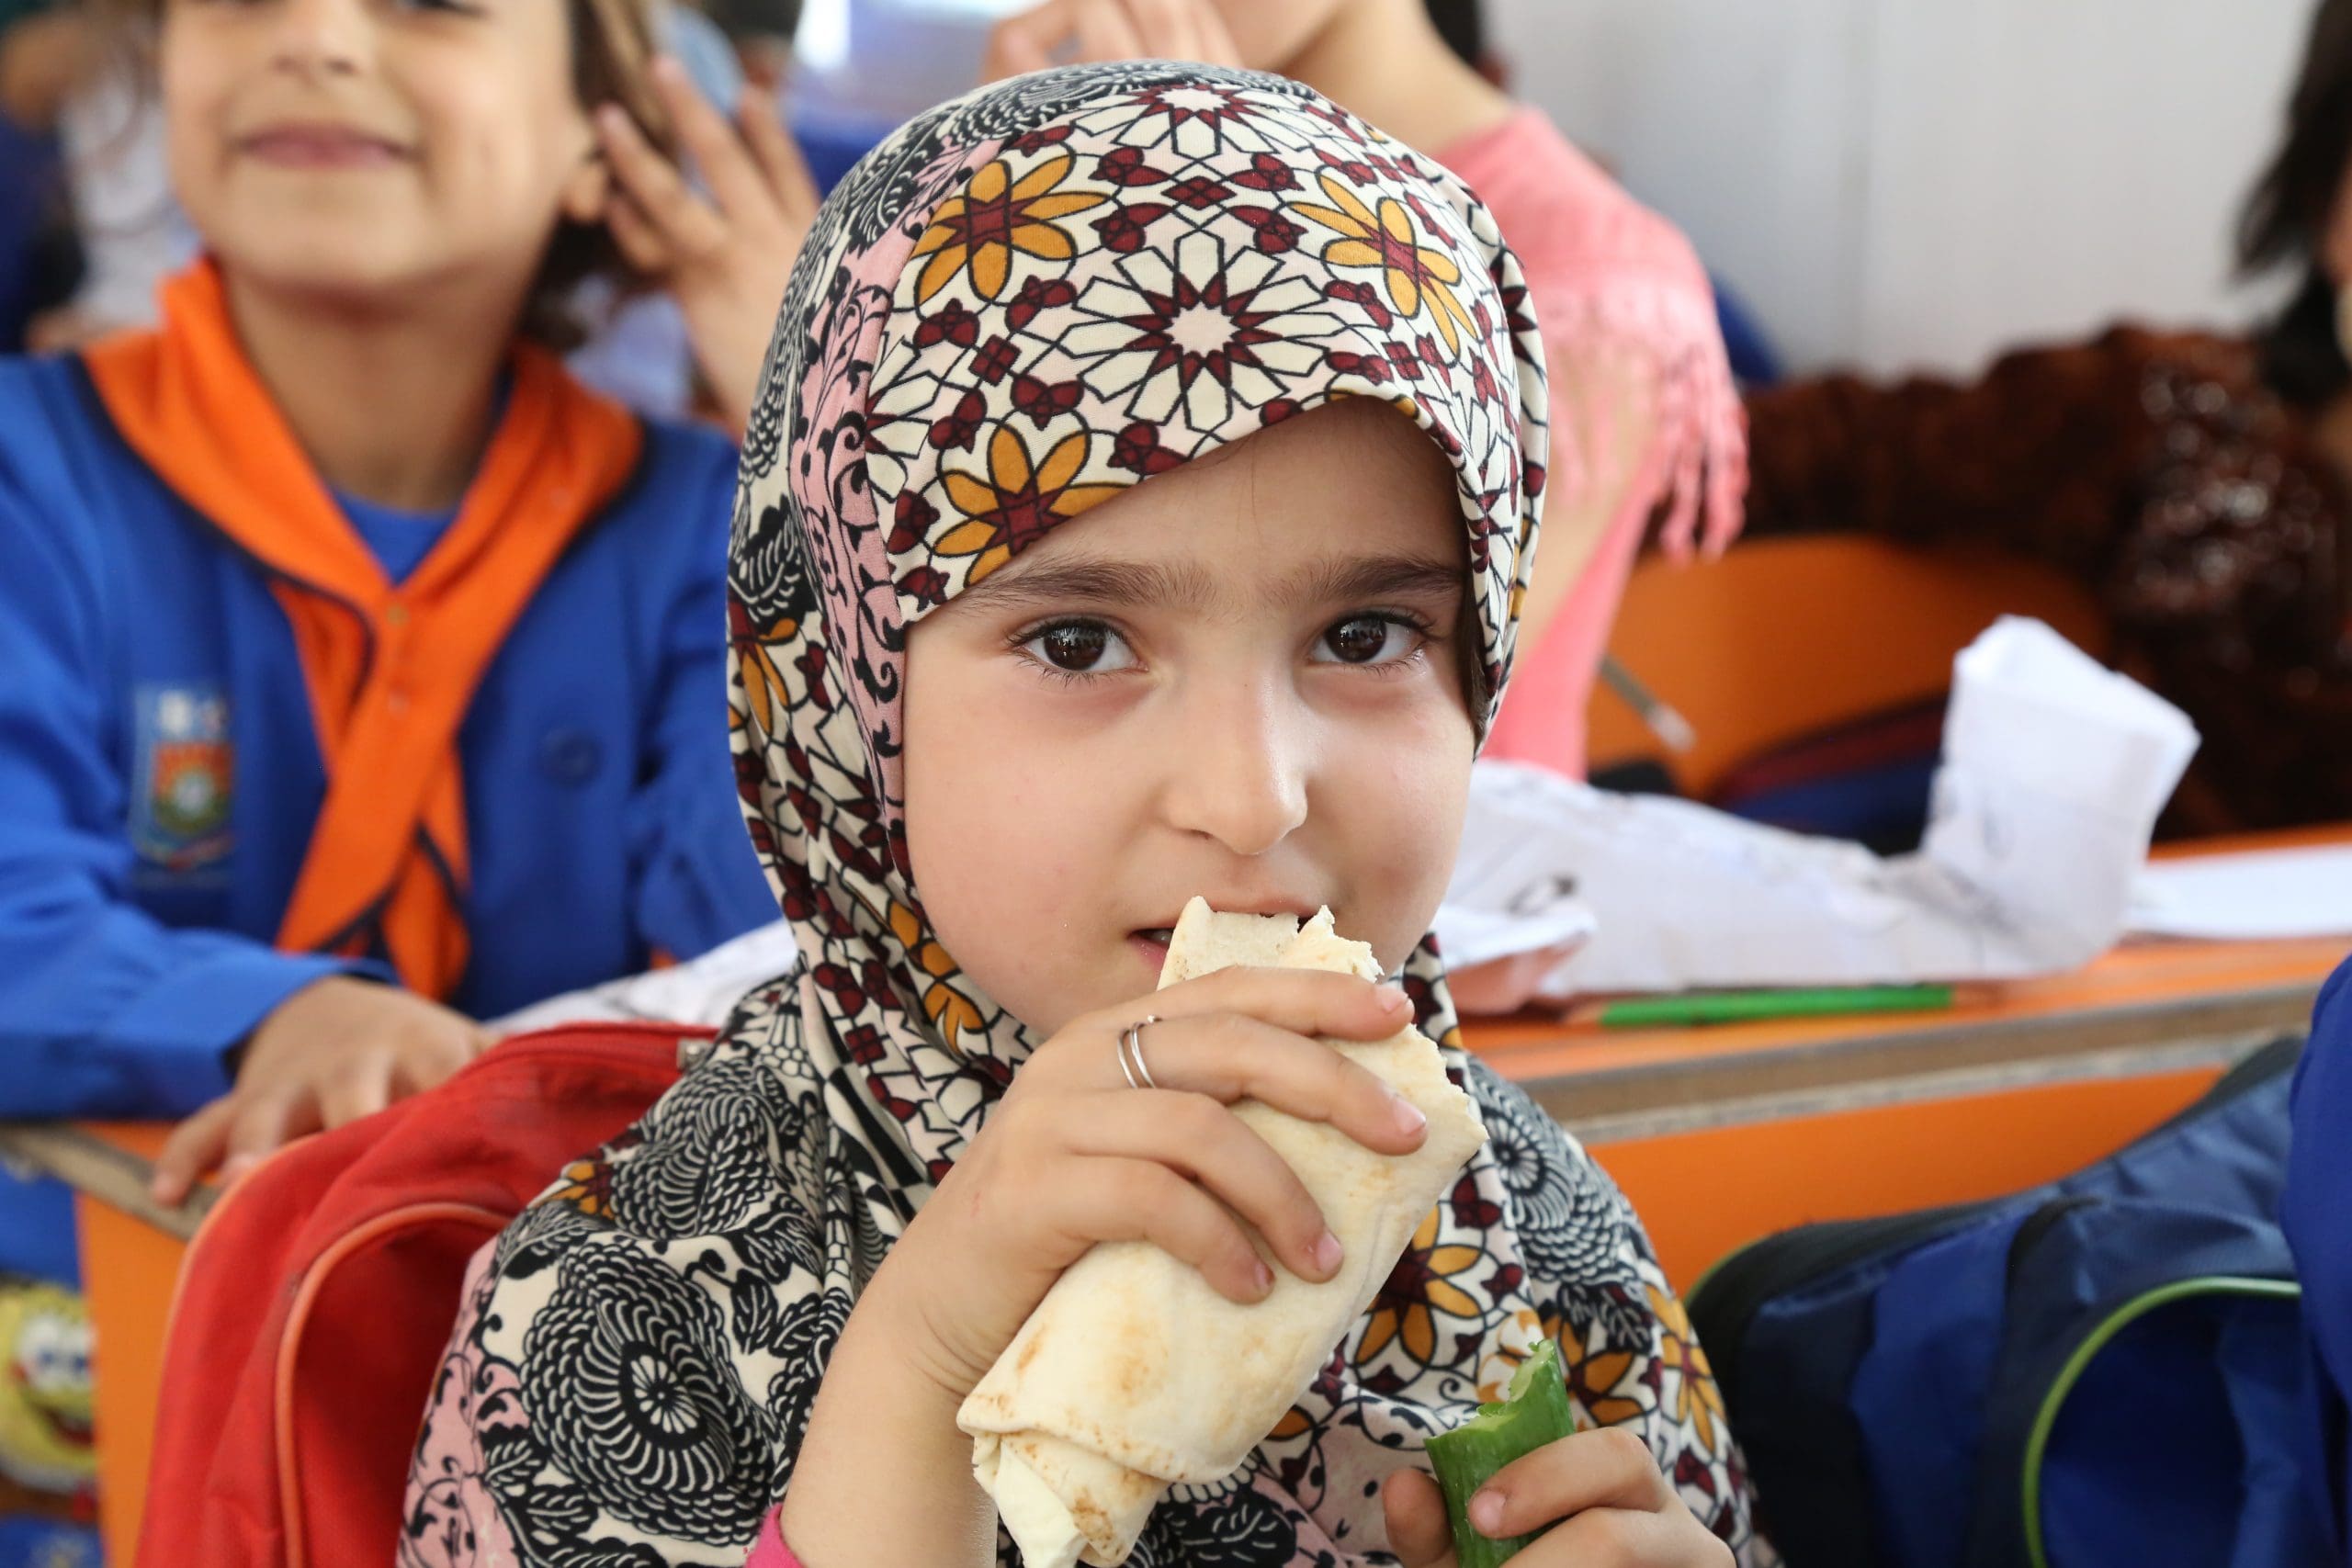 a young girl in colorful headscarf bites sandwich